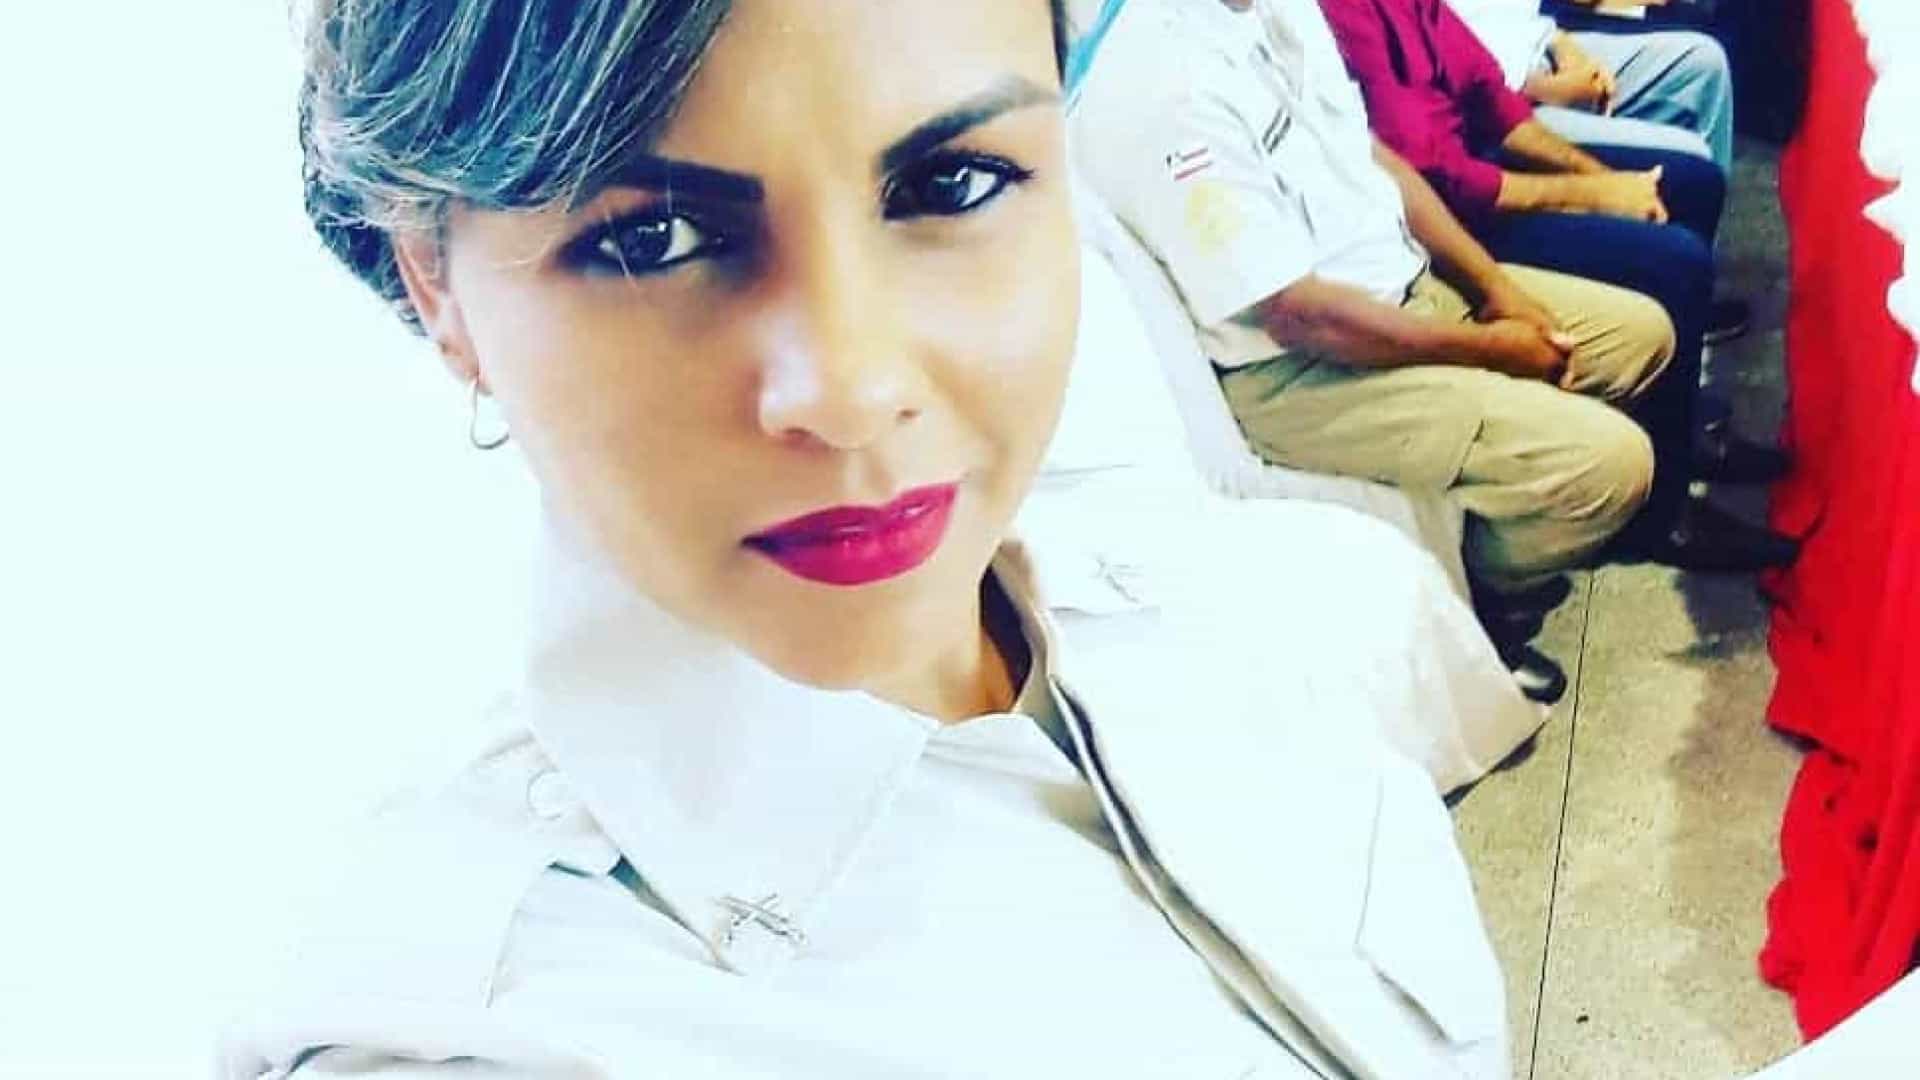 State Police officer and "digital influencer" Rafaella Gonçalves, 38, was killed on Monday, October 5th in Ibotirama, in western Bahia. Femicide is the main suspicion - her husband, also a police officer, would have killed Rafaella and committed suicide afterwards.